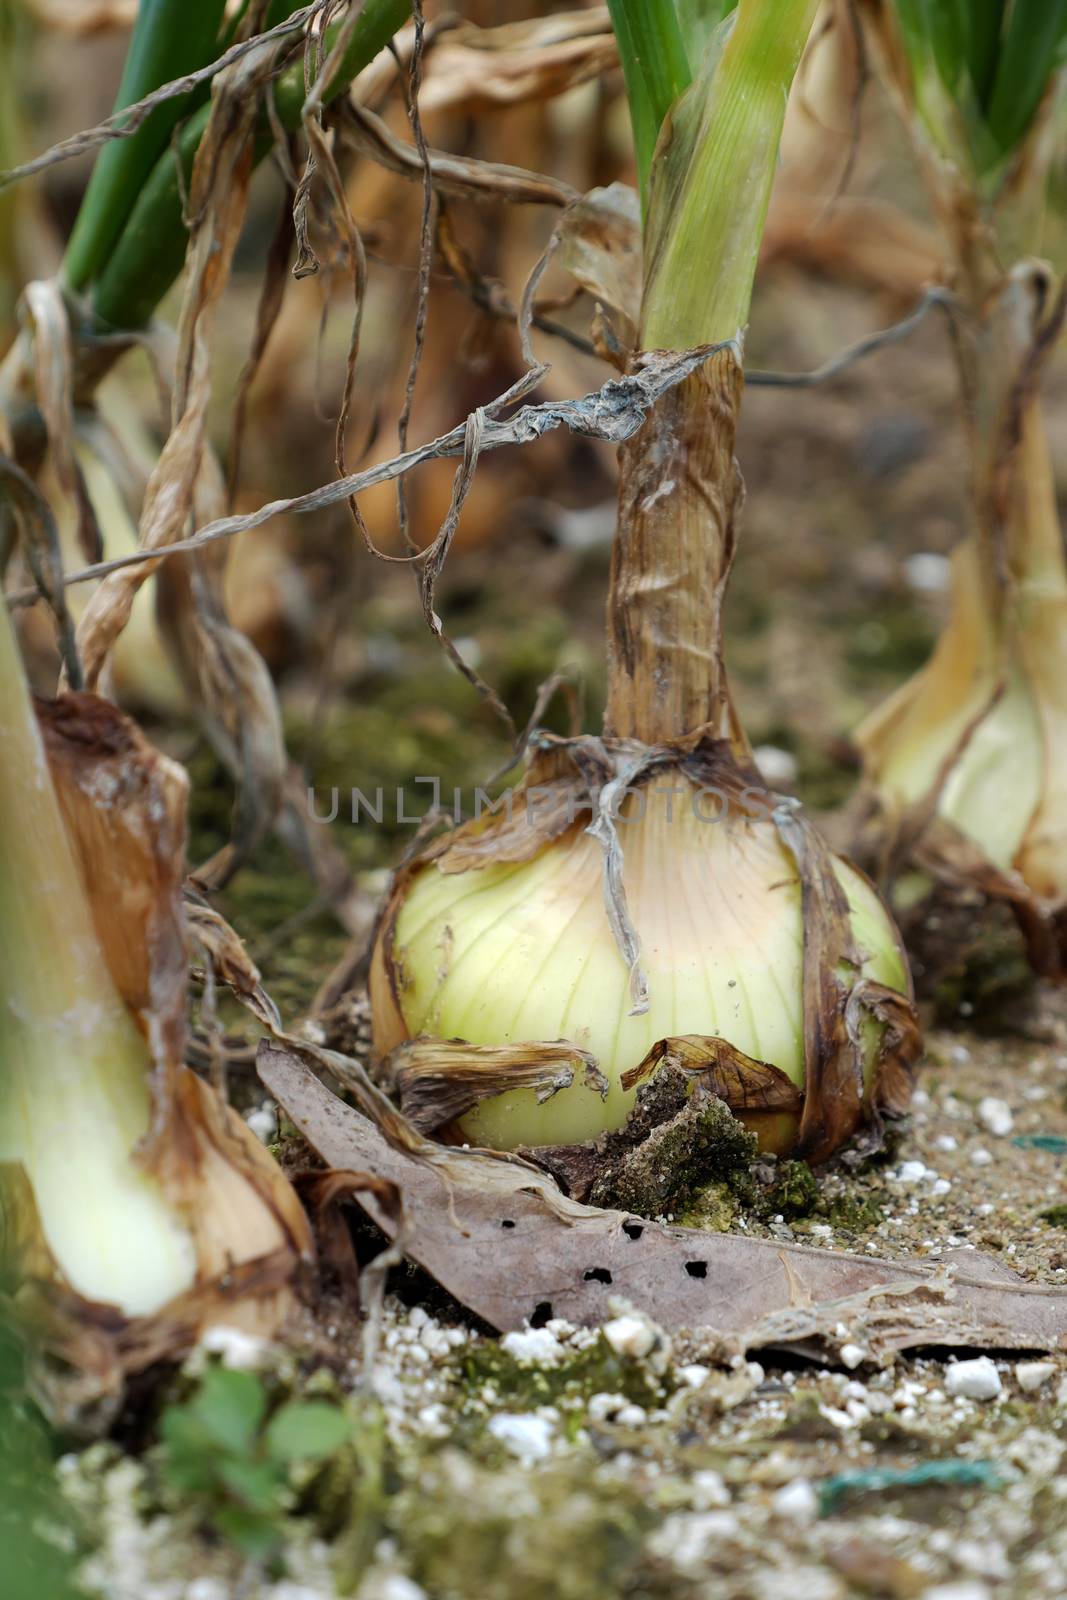 Onion farm at Duc Trong, Viet Nam, onions bulb ready to harvest for spring season, a popular agriculture product in Vietnam